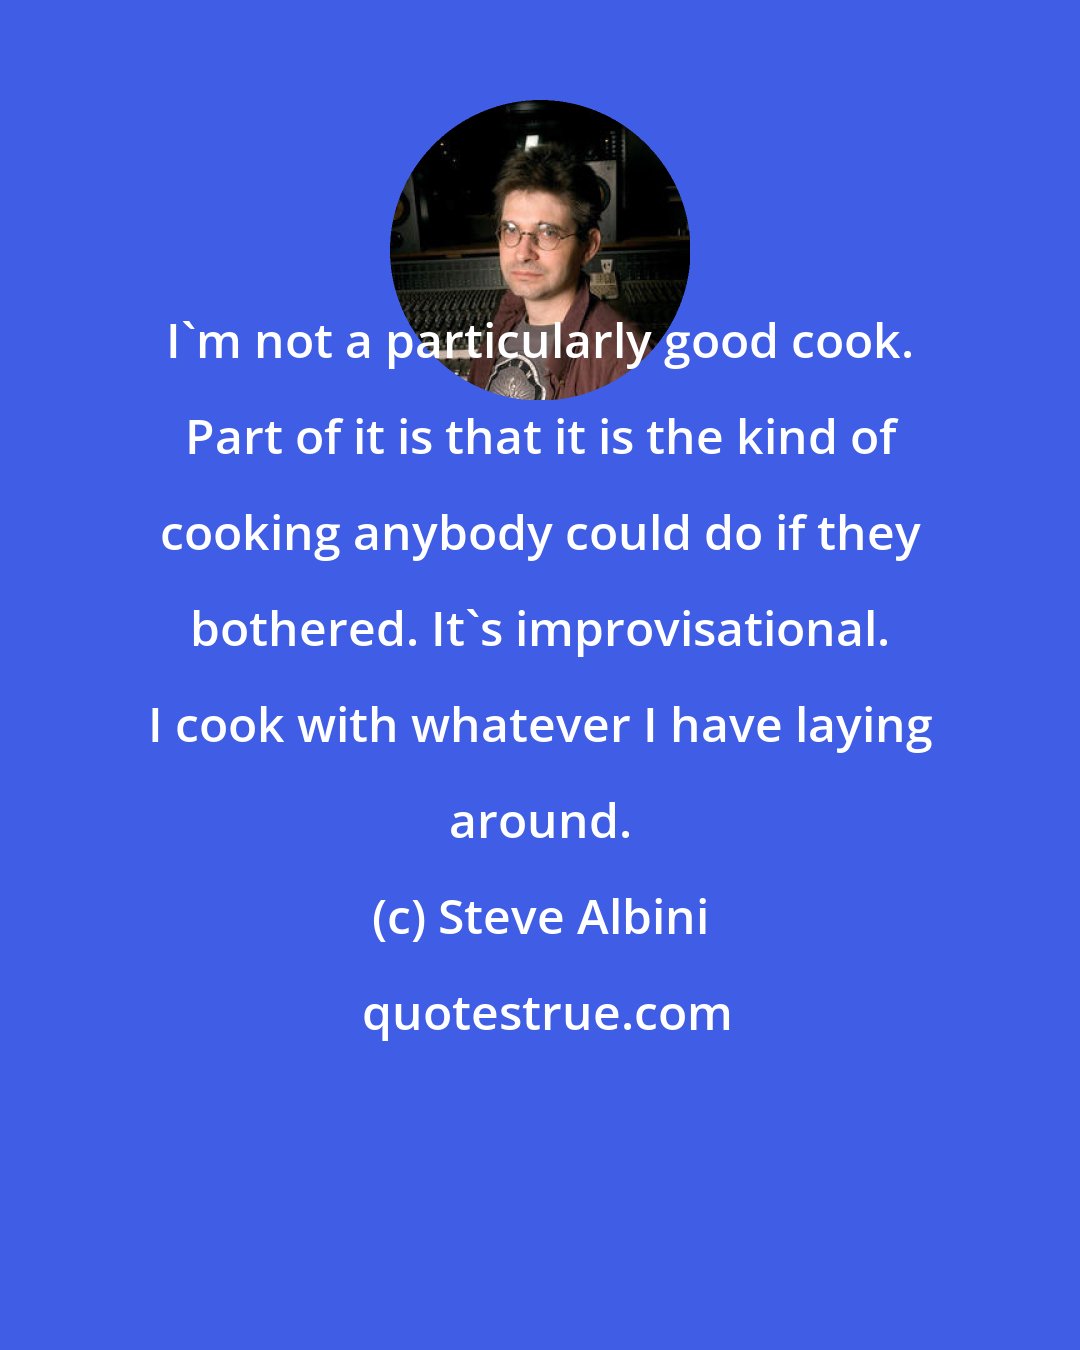 Steve Albini: I'm not a particularly good cook. Part of it is that it is the kind of cooking anybody could do if they bothered. It's improvisational. I cook with whatever I have laying around.